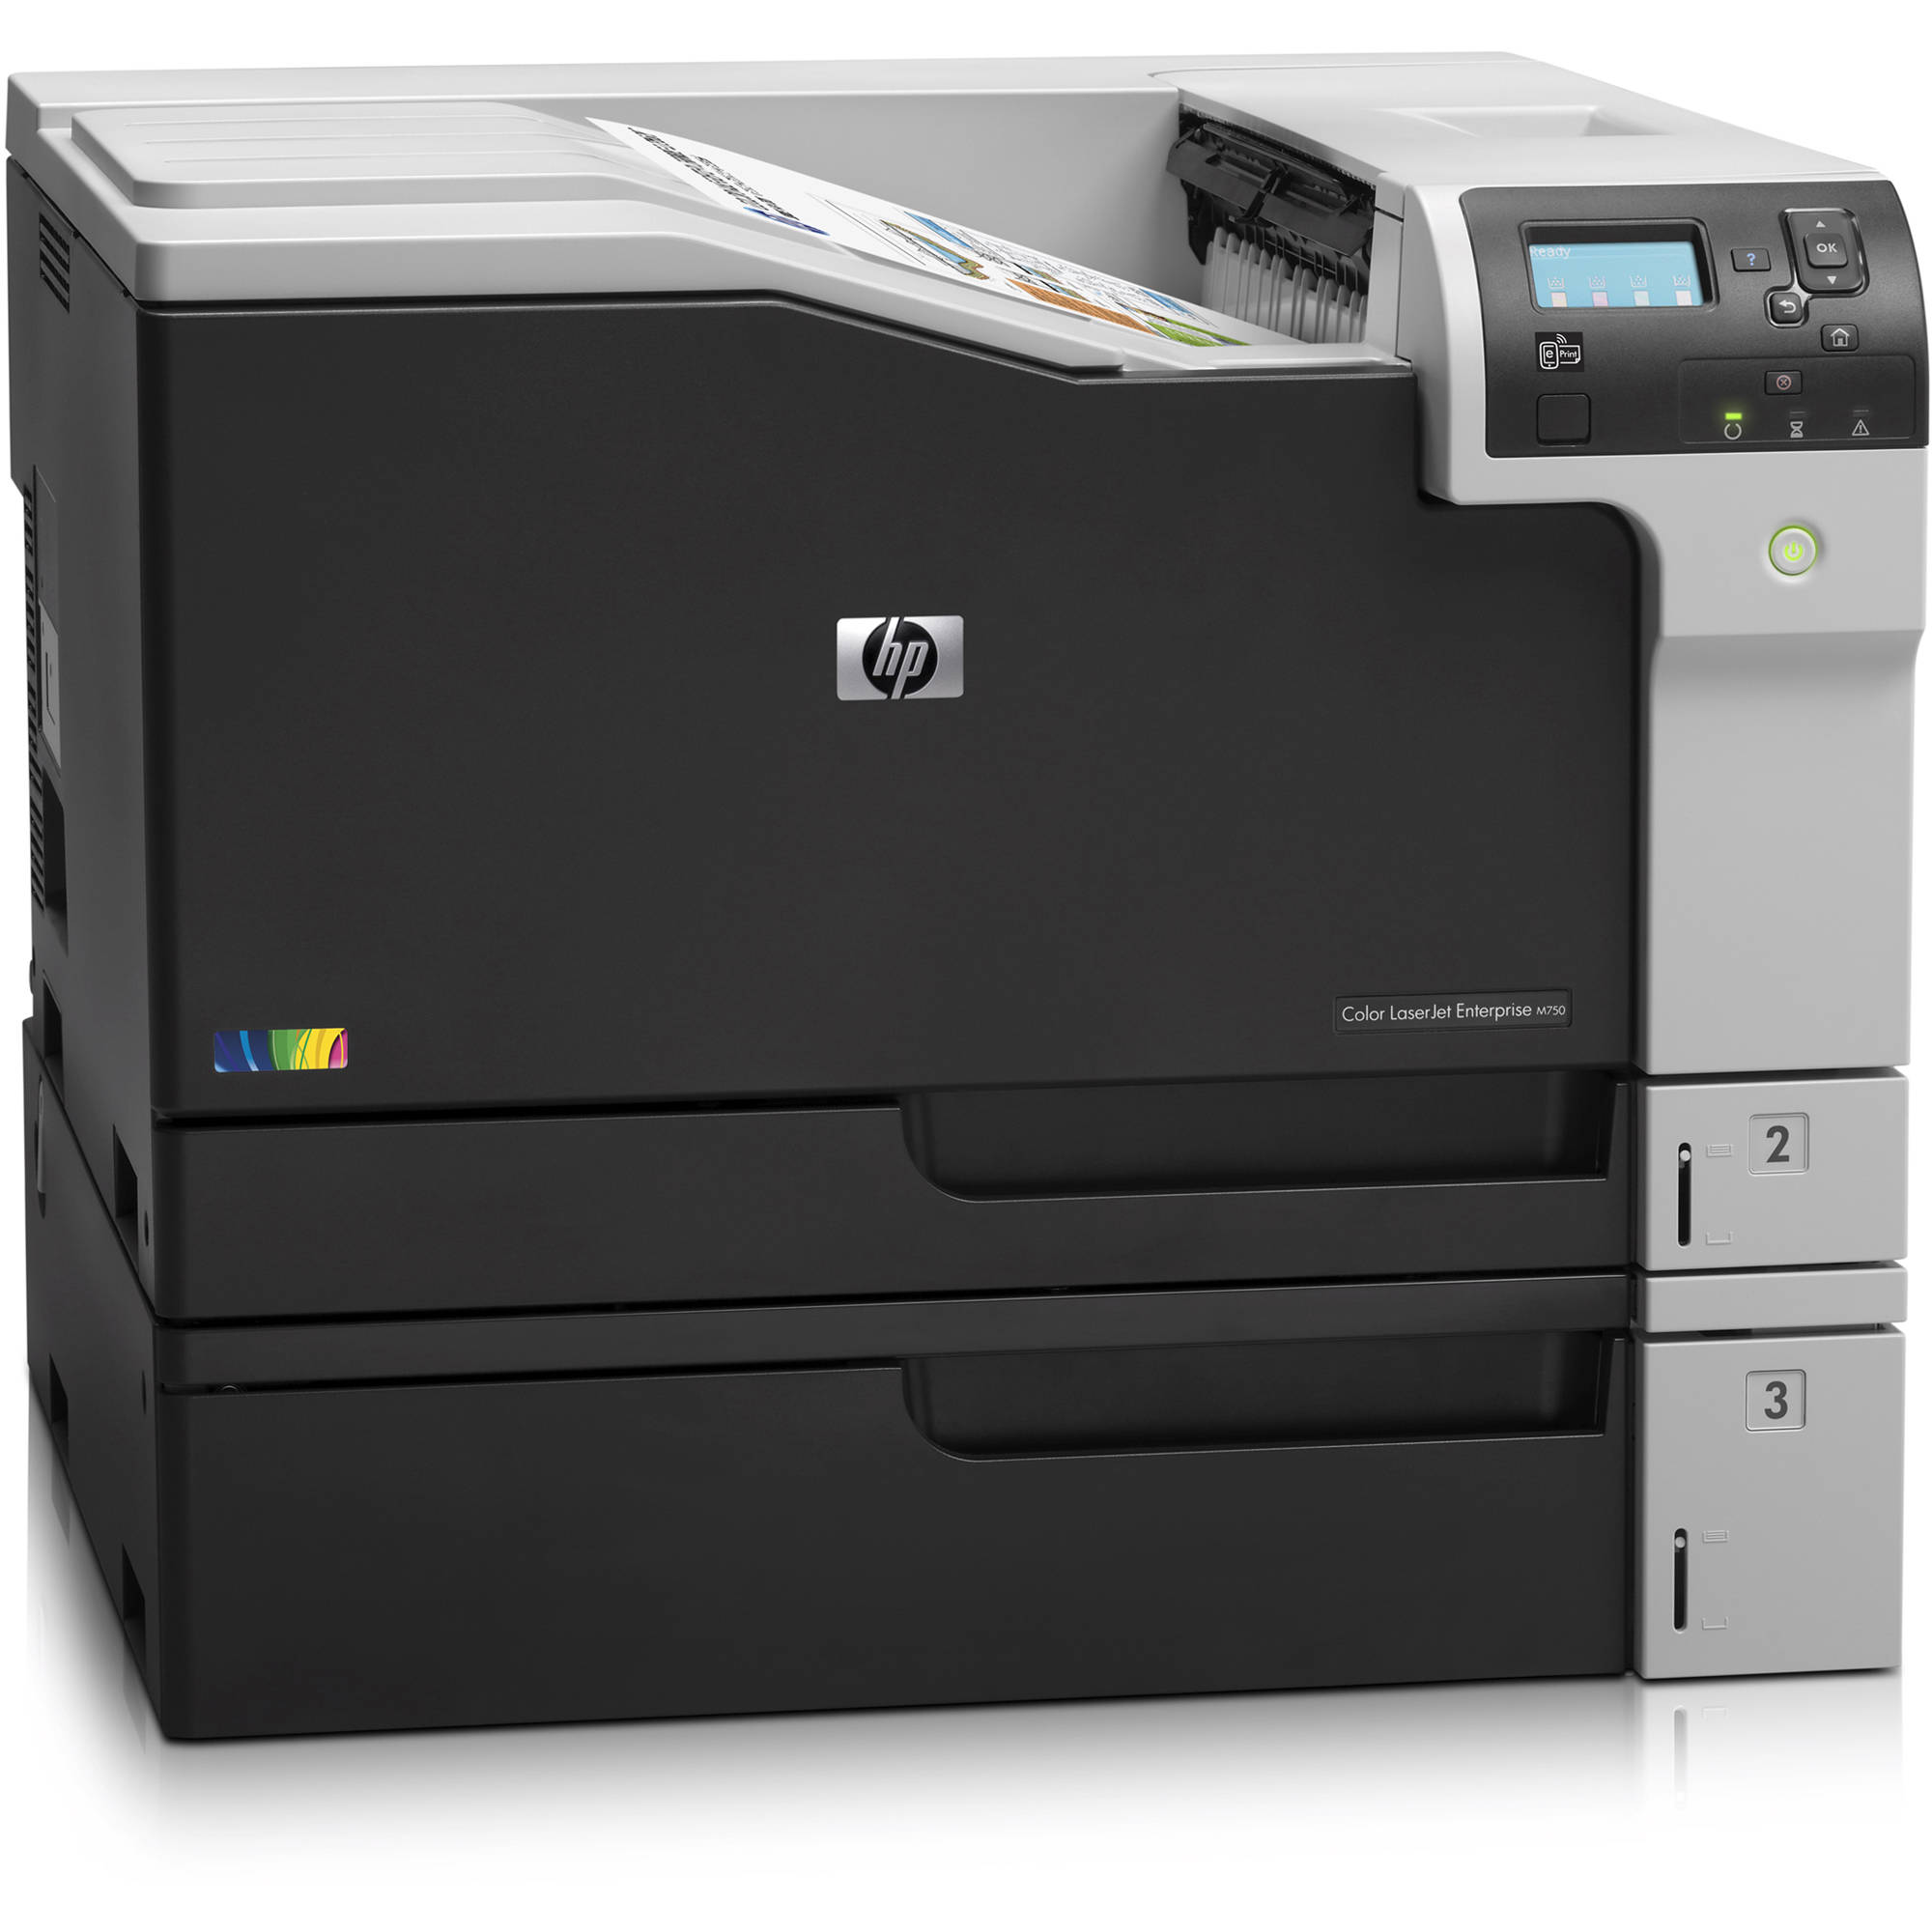 Absolute Toner HP Color 11x17 Laserjet Enterprise M750dn Laser Printer With Auto Two-Sided Printing (D3L09A) For Office, Home Use Laser Printer